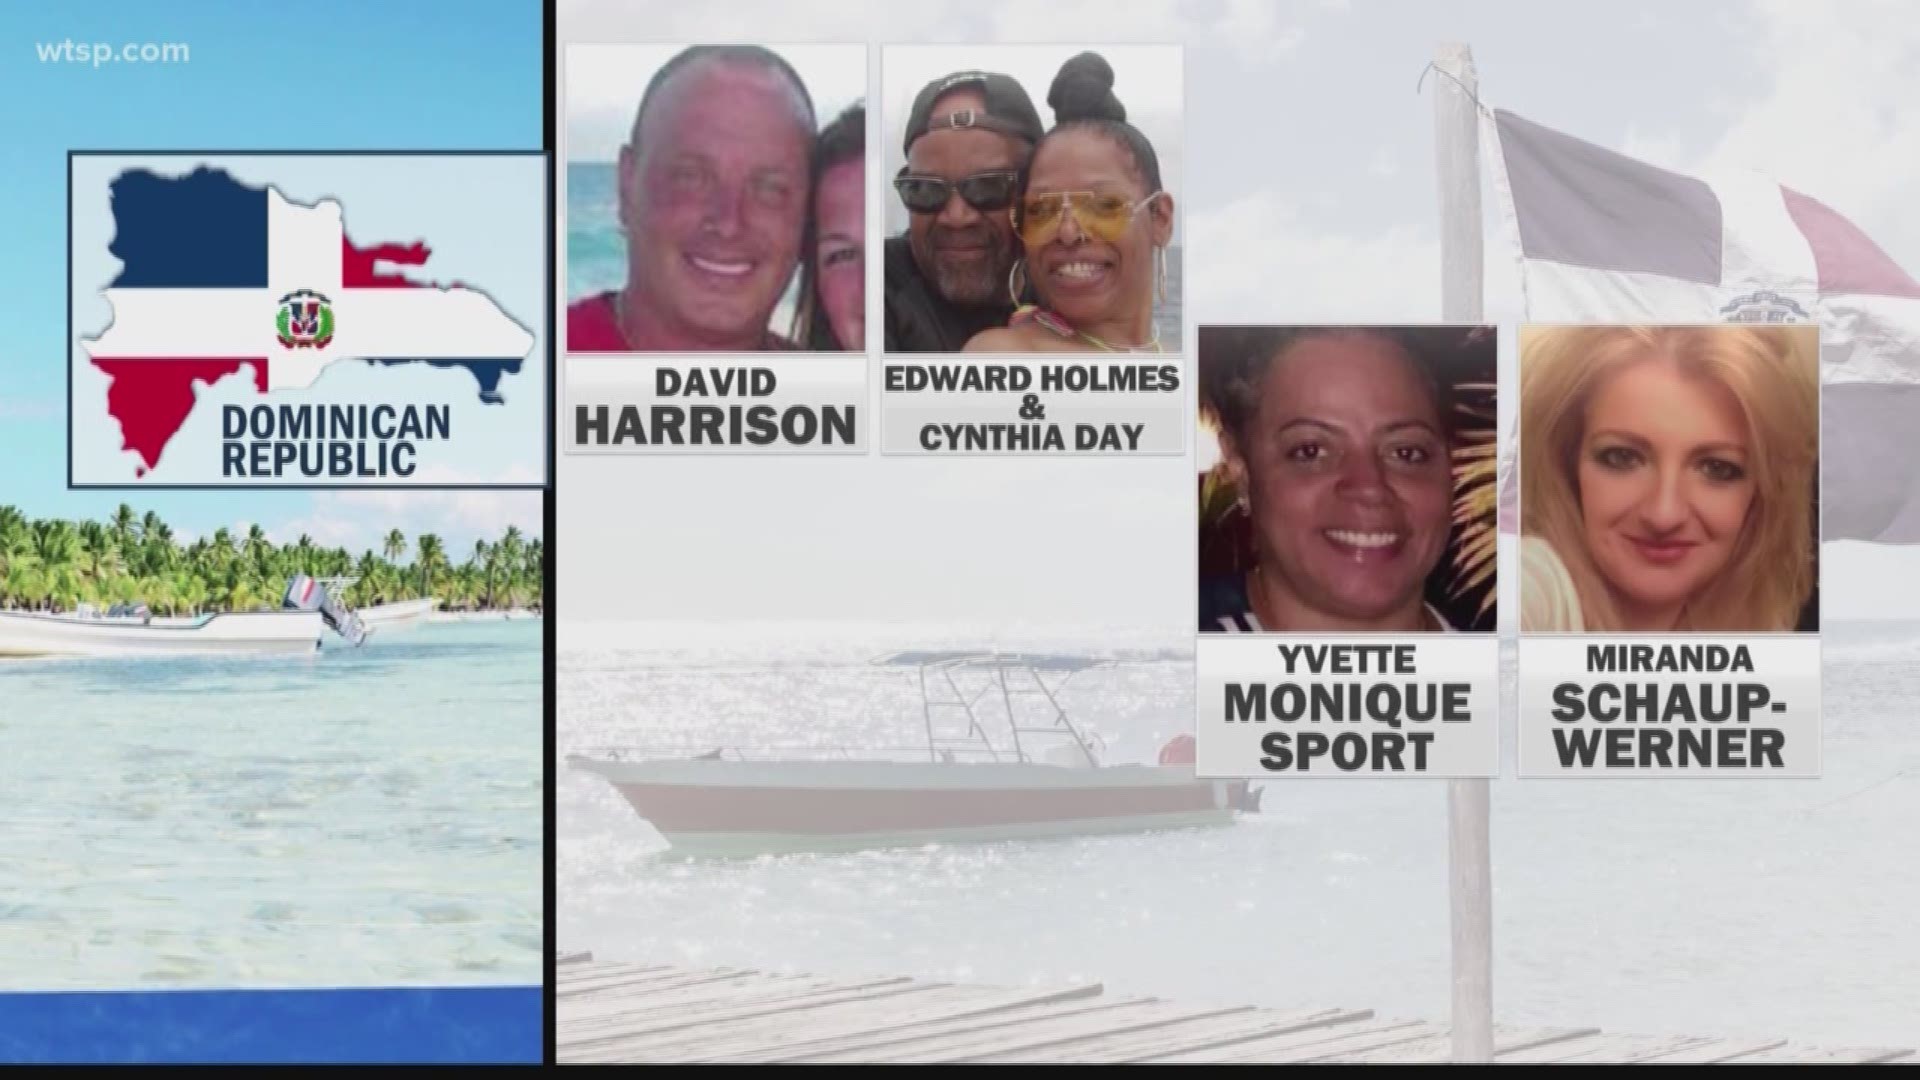 In about a year, at least six U.S. tourists died under strange circumstances in the Dominican Republic. Officials on the island nation and those at home still cannot quite figure out what exactly led to their deaths.

David Harrison, 45, died in July 2018 at the Hard Rock Hotel and Casino resort in Punta Cana, and authorities told his wife he died of a heart attack. The Maryland woman said she continues to be suspicious, especially following the deaths of several more people since.

"I didn't plan on coming back a widow," Dawn McCoy said through tears. "I wasn't prepared for what was coming my way."